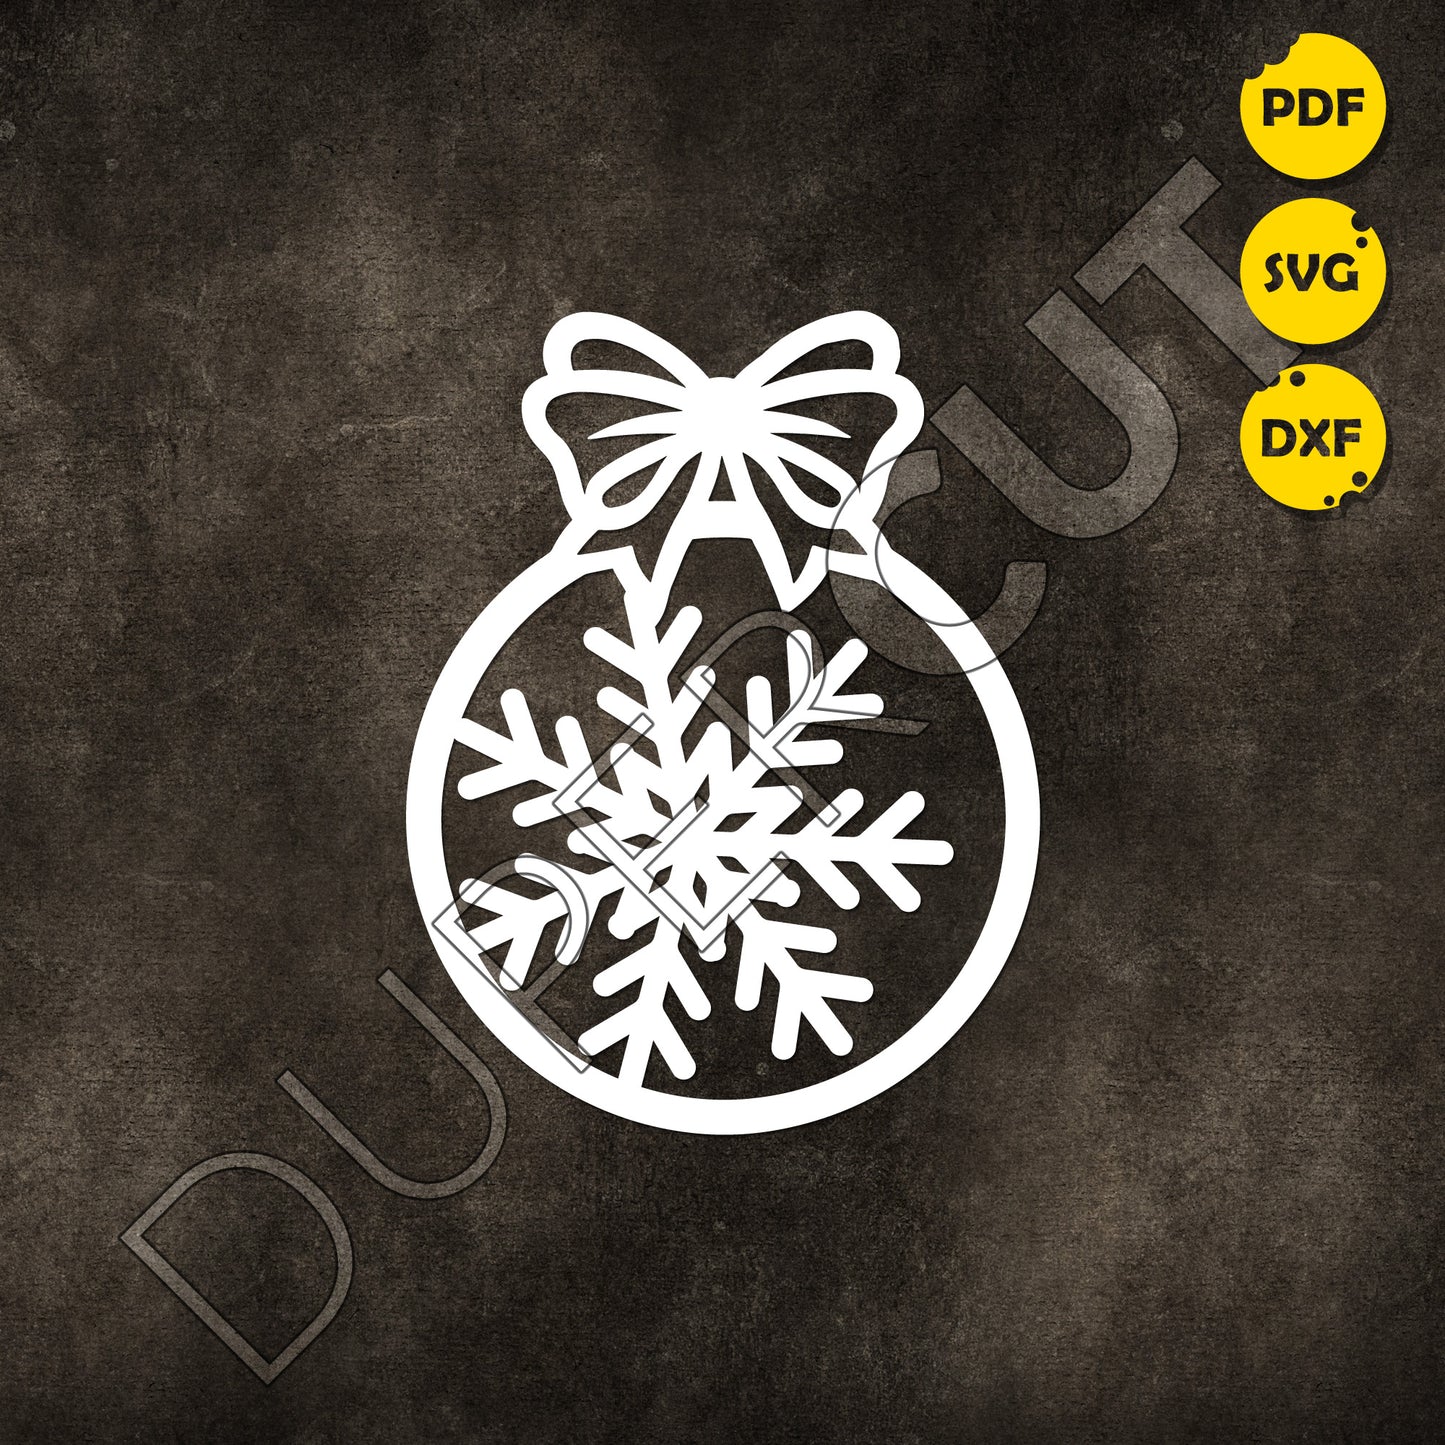 Snowflake bow Christmas ornament, easy cutting for scroll saw  template - SVG DXF PNG files for Cricut, Glowforge, Silhouette Cameo, CNC Machines